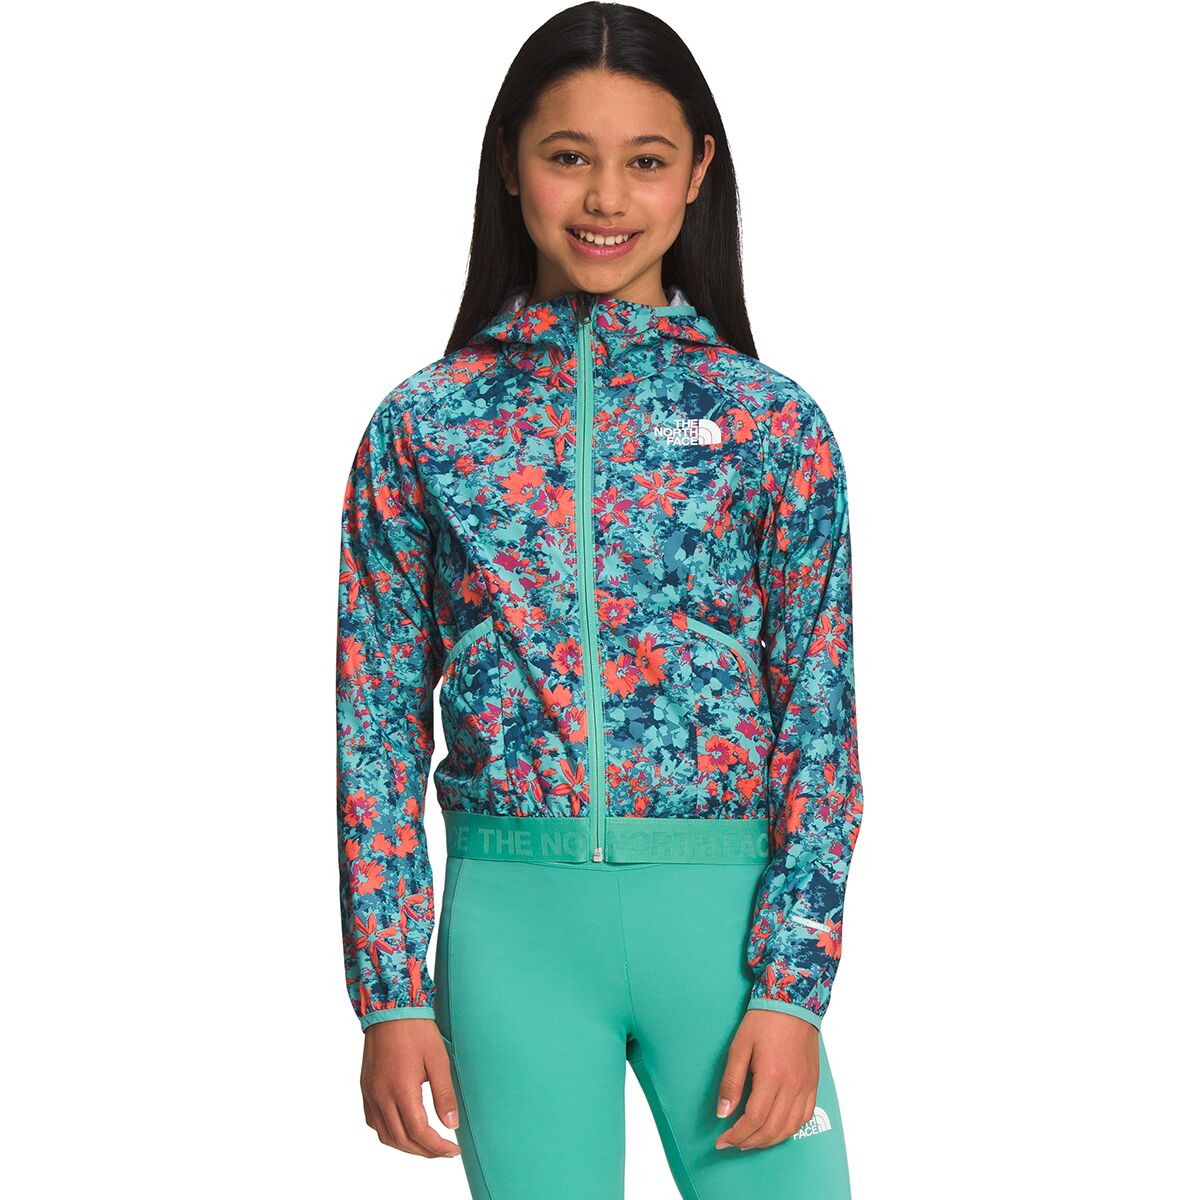 The North Face Printed Never Stop Hooded Wind Jacket - Girls'